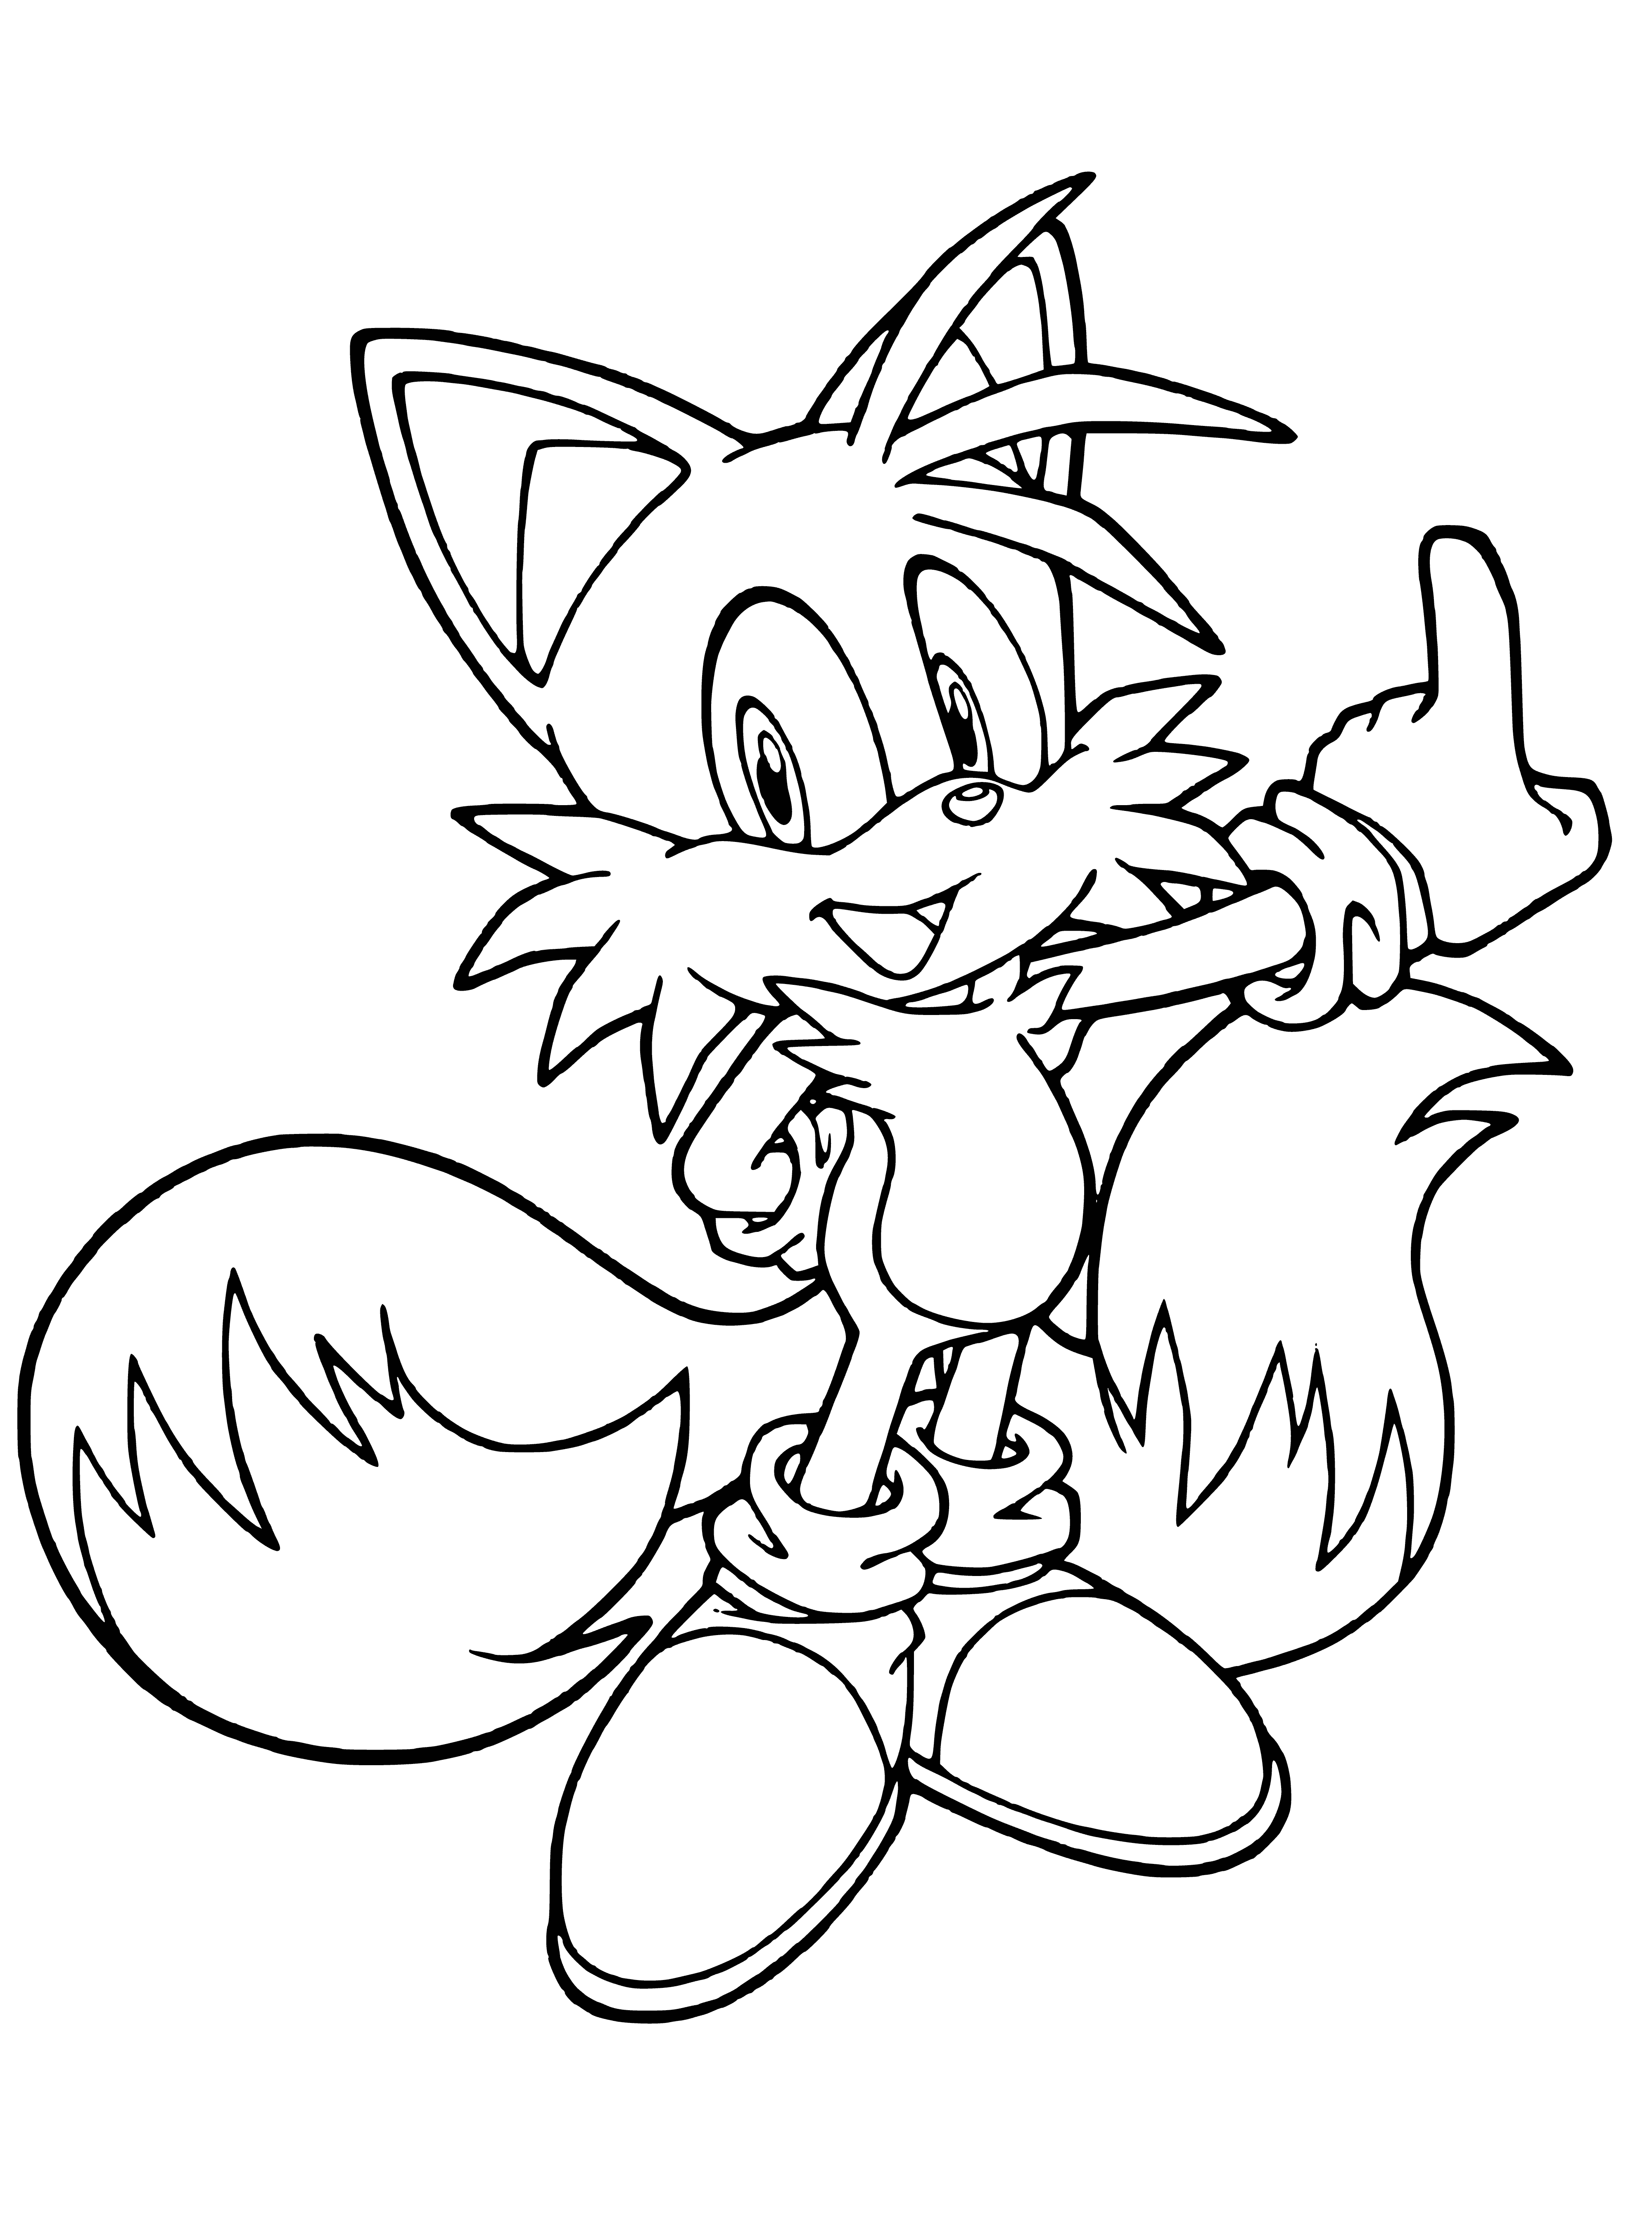 coloring page: Miles Prower from Sonic X is an orange fox with two tails, wearing red/white shoes and wristband.